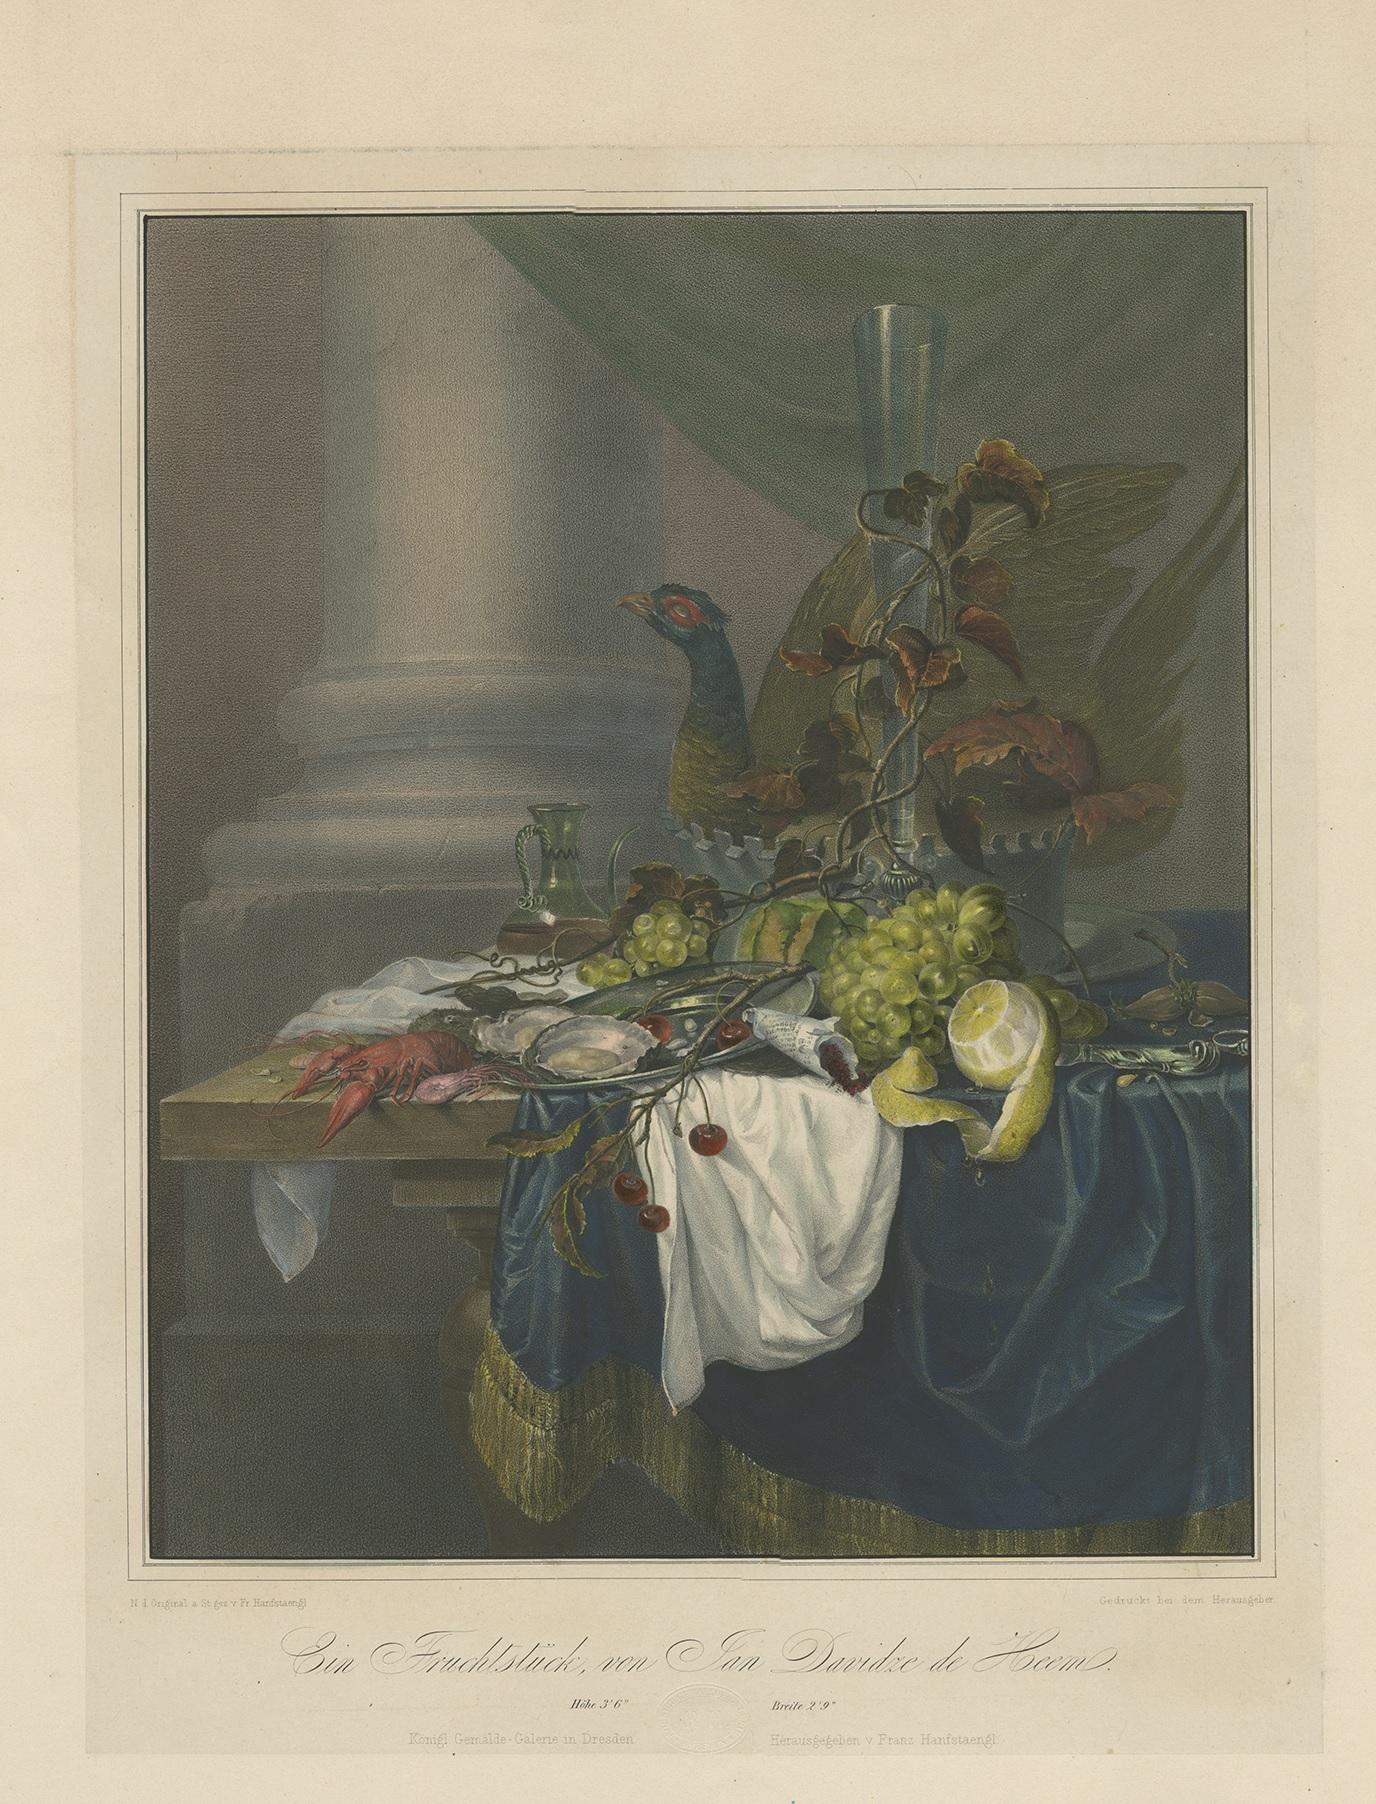 Antique print titled 'Fruchtstück von Jan Davidze de Heem'. Lithograph on chine collé with a still-life with fruit and a plate of oysters and seafood, a turkey pie beyond; after Jan de Heem, c.1836.